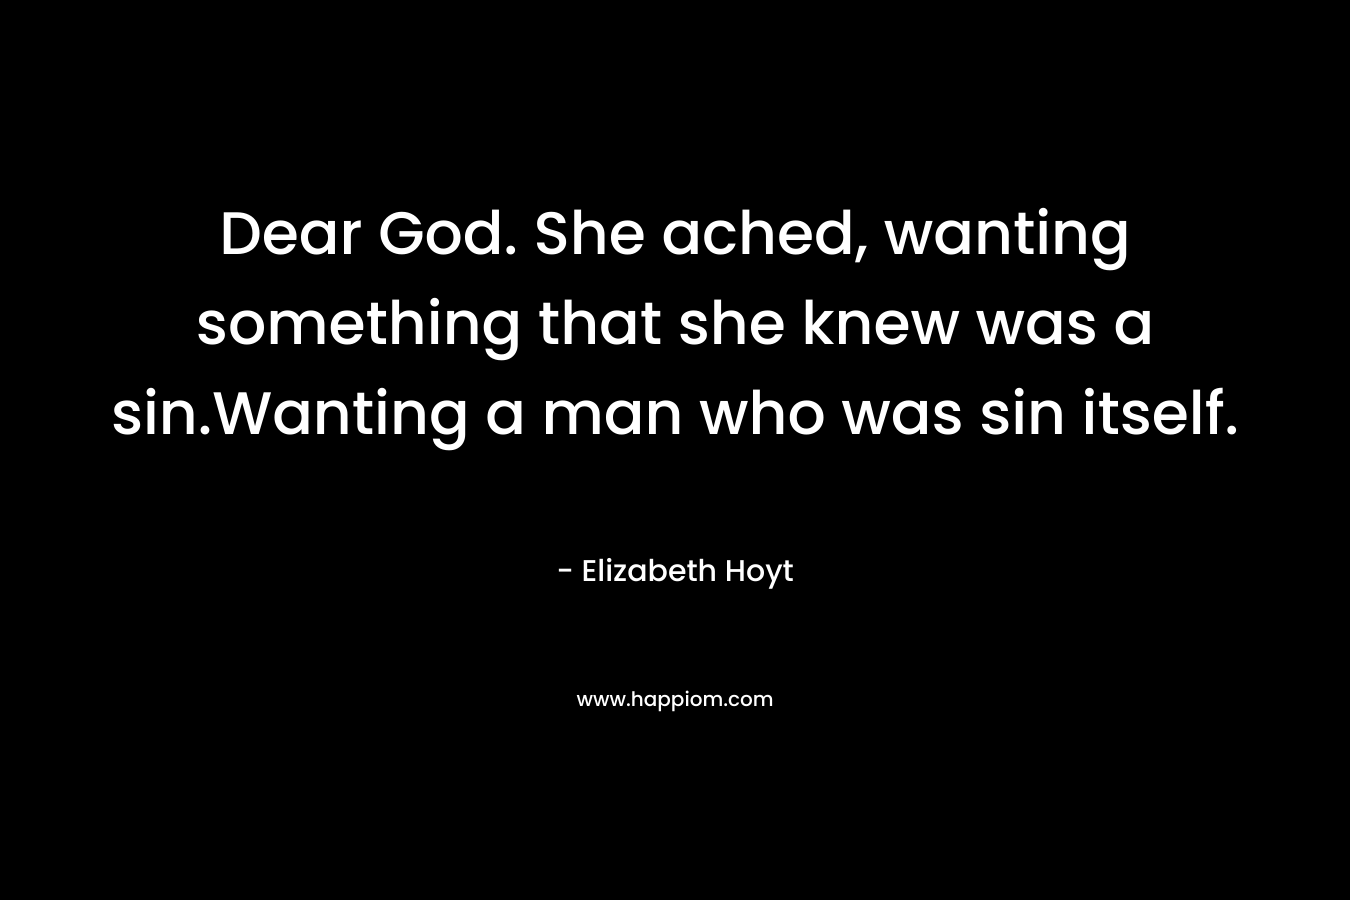 Dear God. She ached, wanting something that she knew was a sin.Wanting a man who was sin itself. – Elizabeth Hoyt